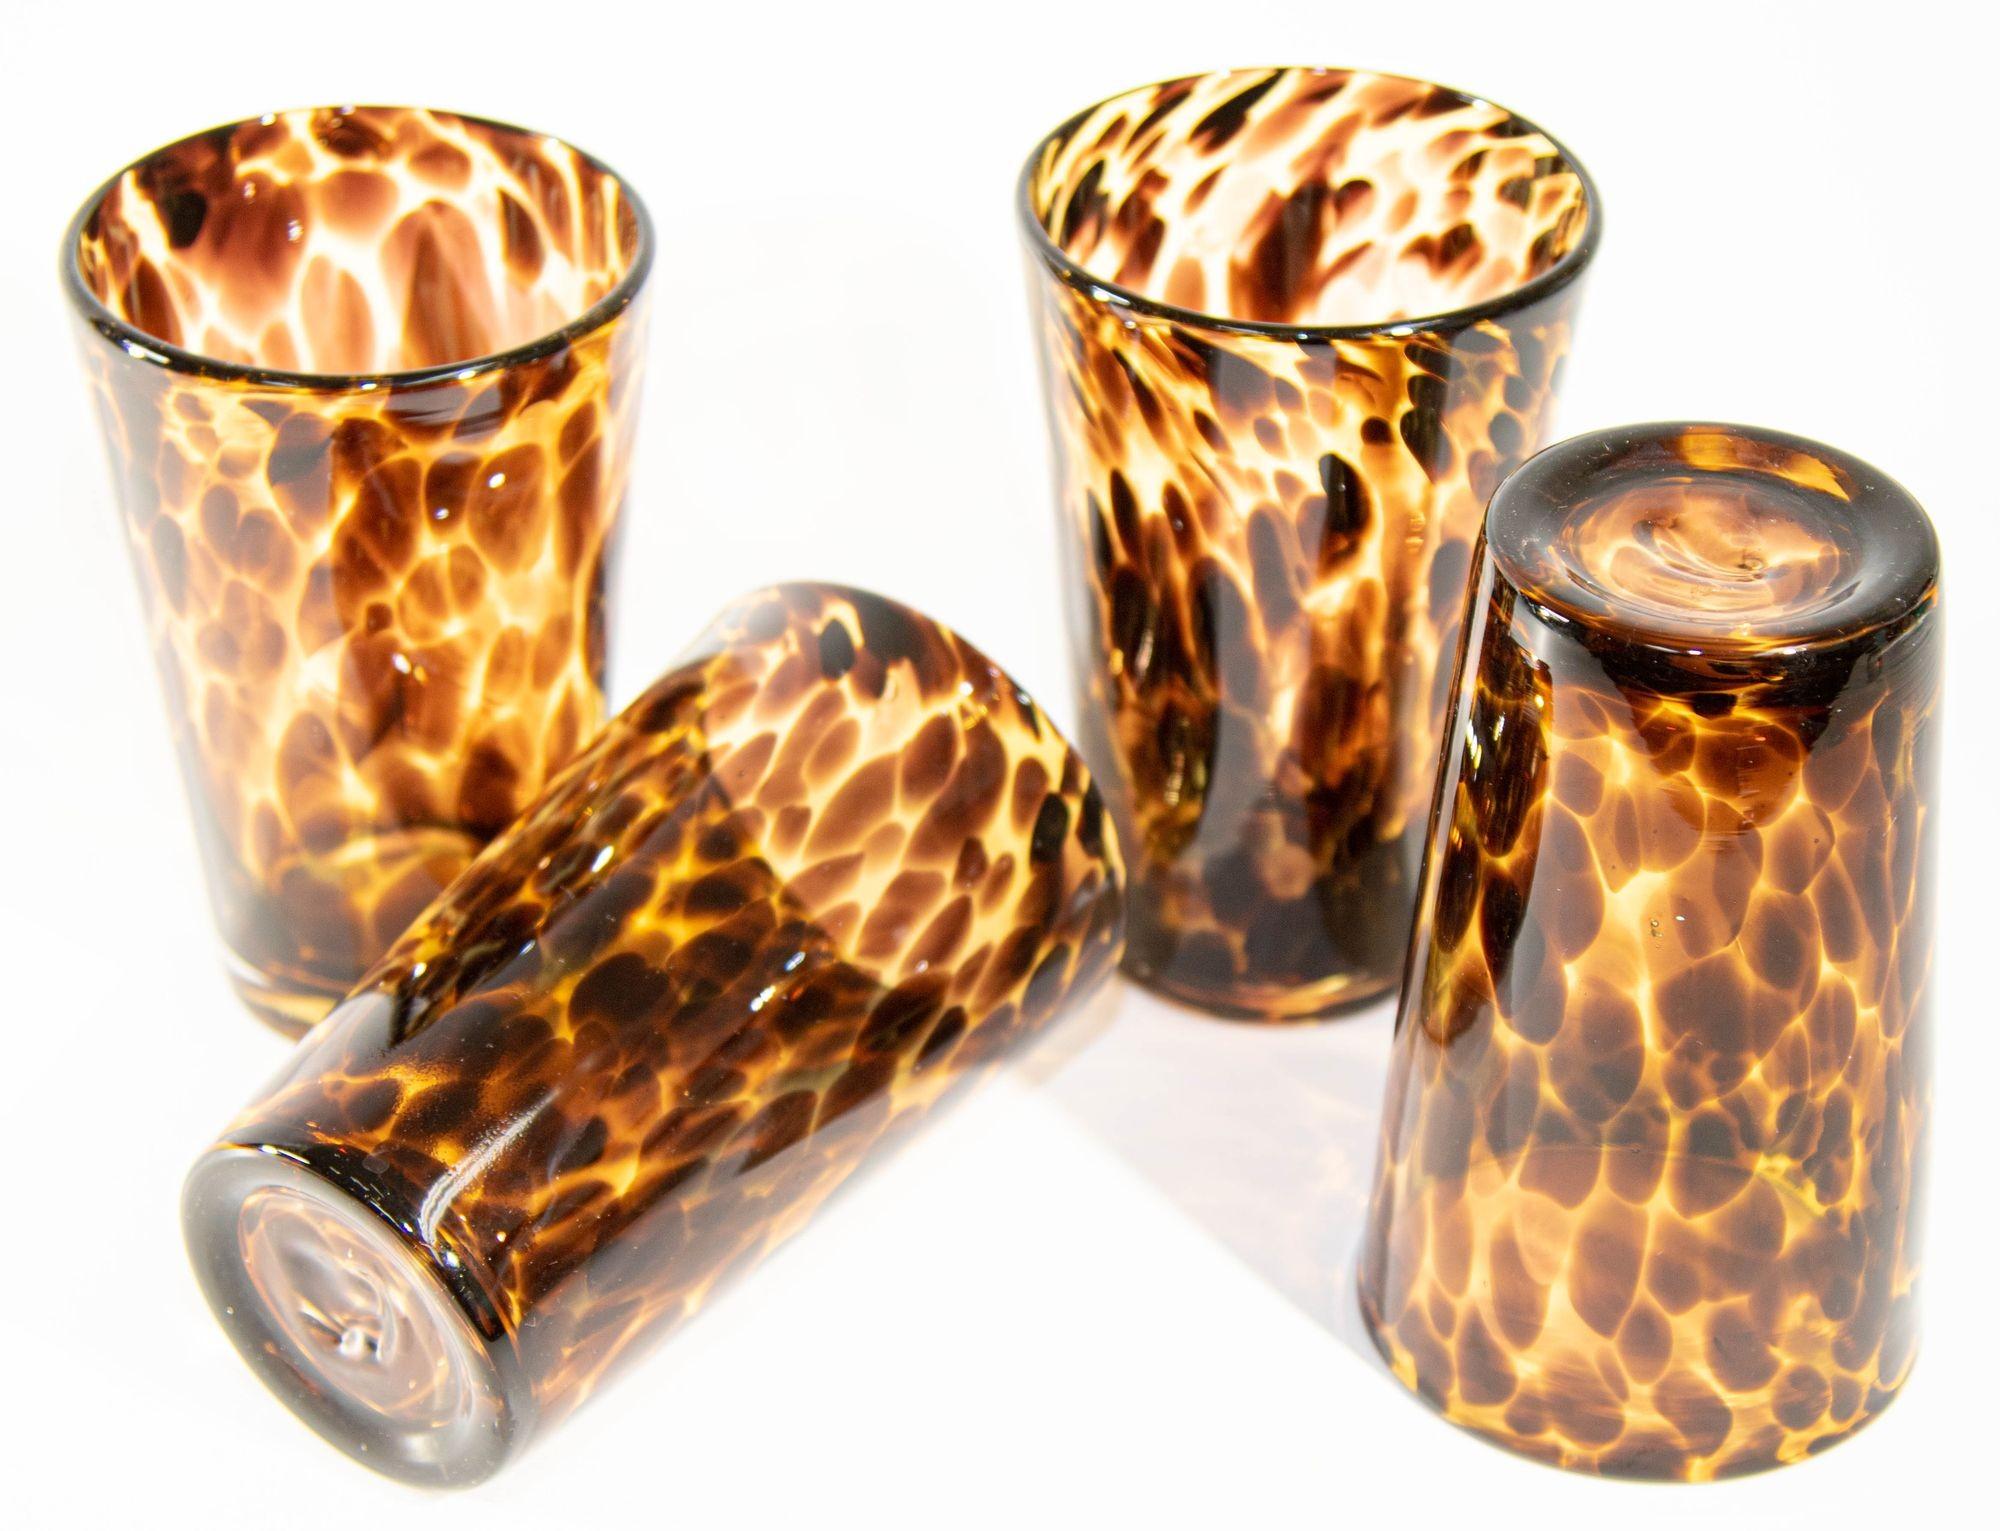 Vintage amber drinking glasses set of four highball tumbler glasses mouth-blown with exclusive tortoiseshell color flowing pattern.
A distinctive tortoise shell motif brings rich color and dimension to a glass barware set that makes a stunning